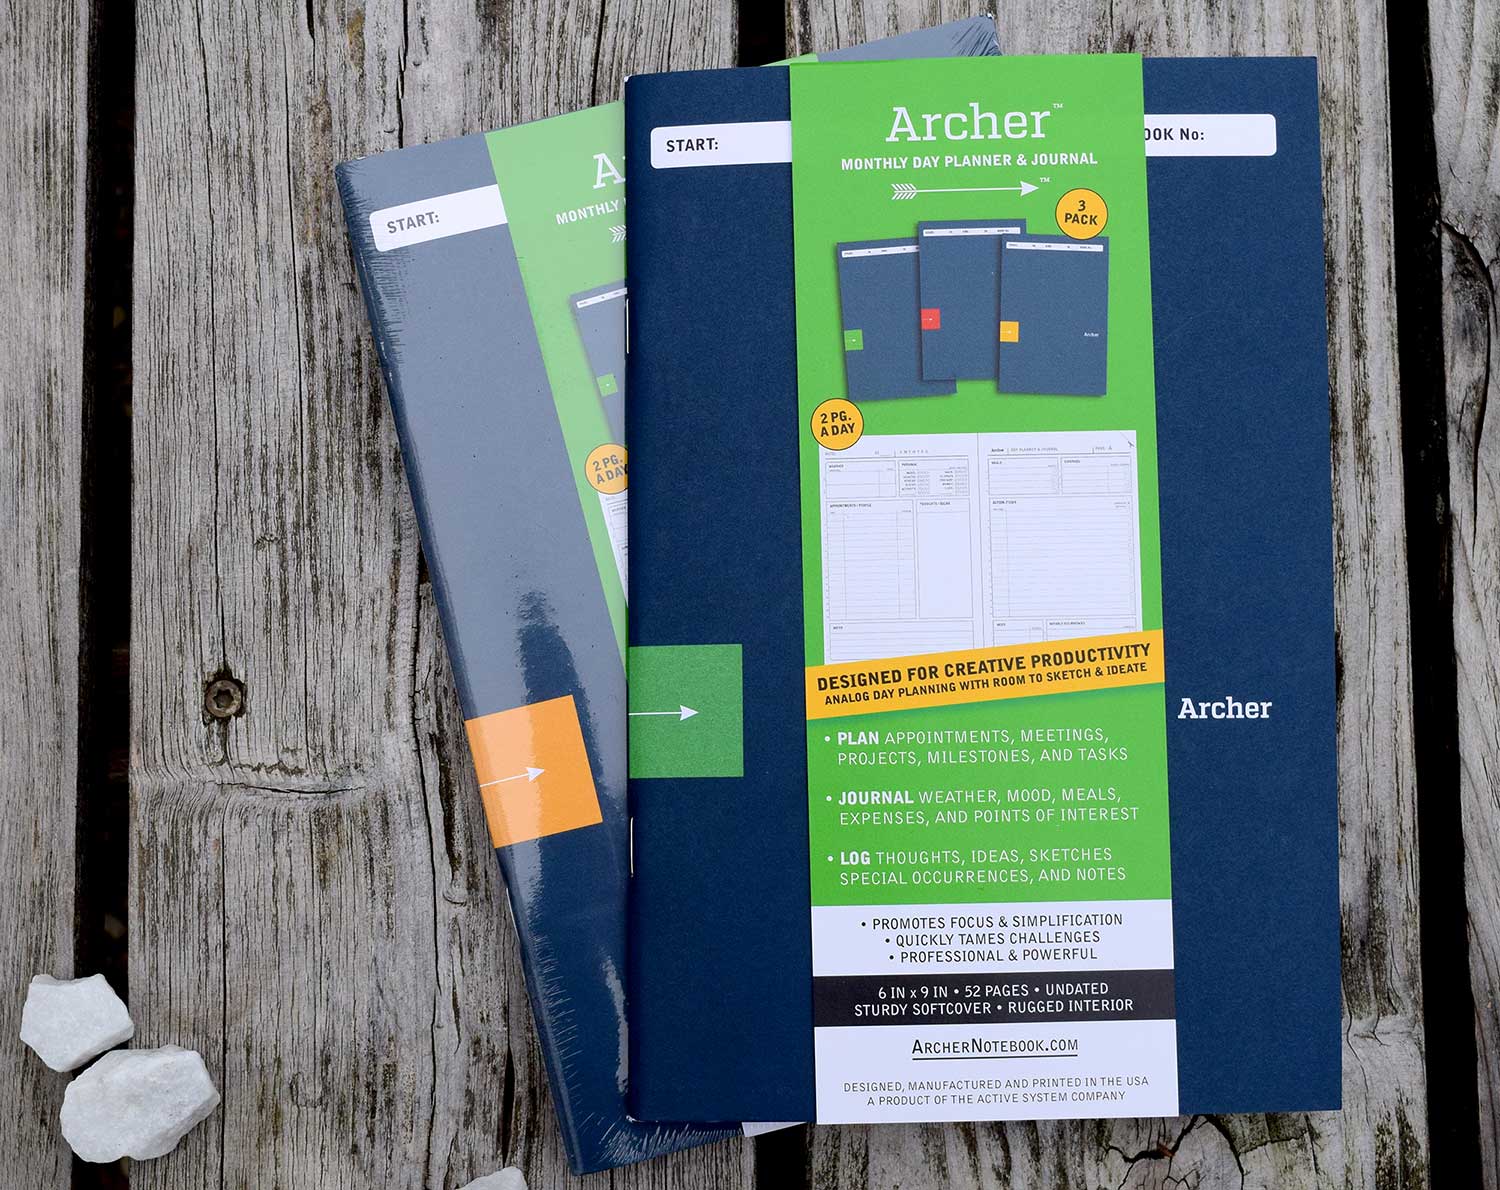 I decided to call my Amazon business product The Archer - launch a business